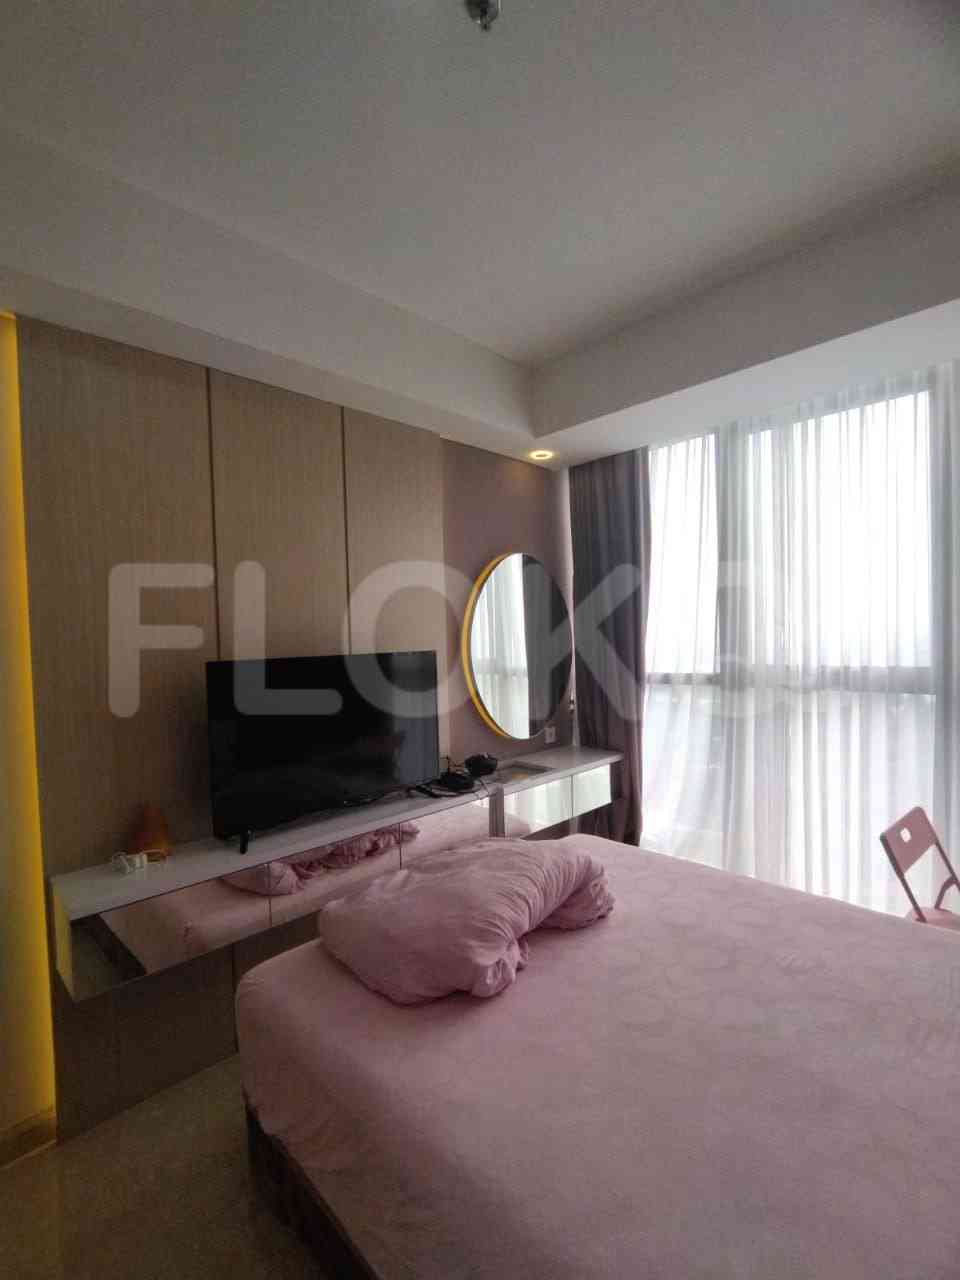 3 Bedroom on 25th Floor for Rent in Gold Coast Apartment - fka079 5